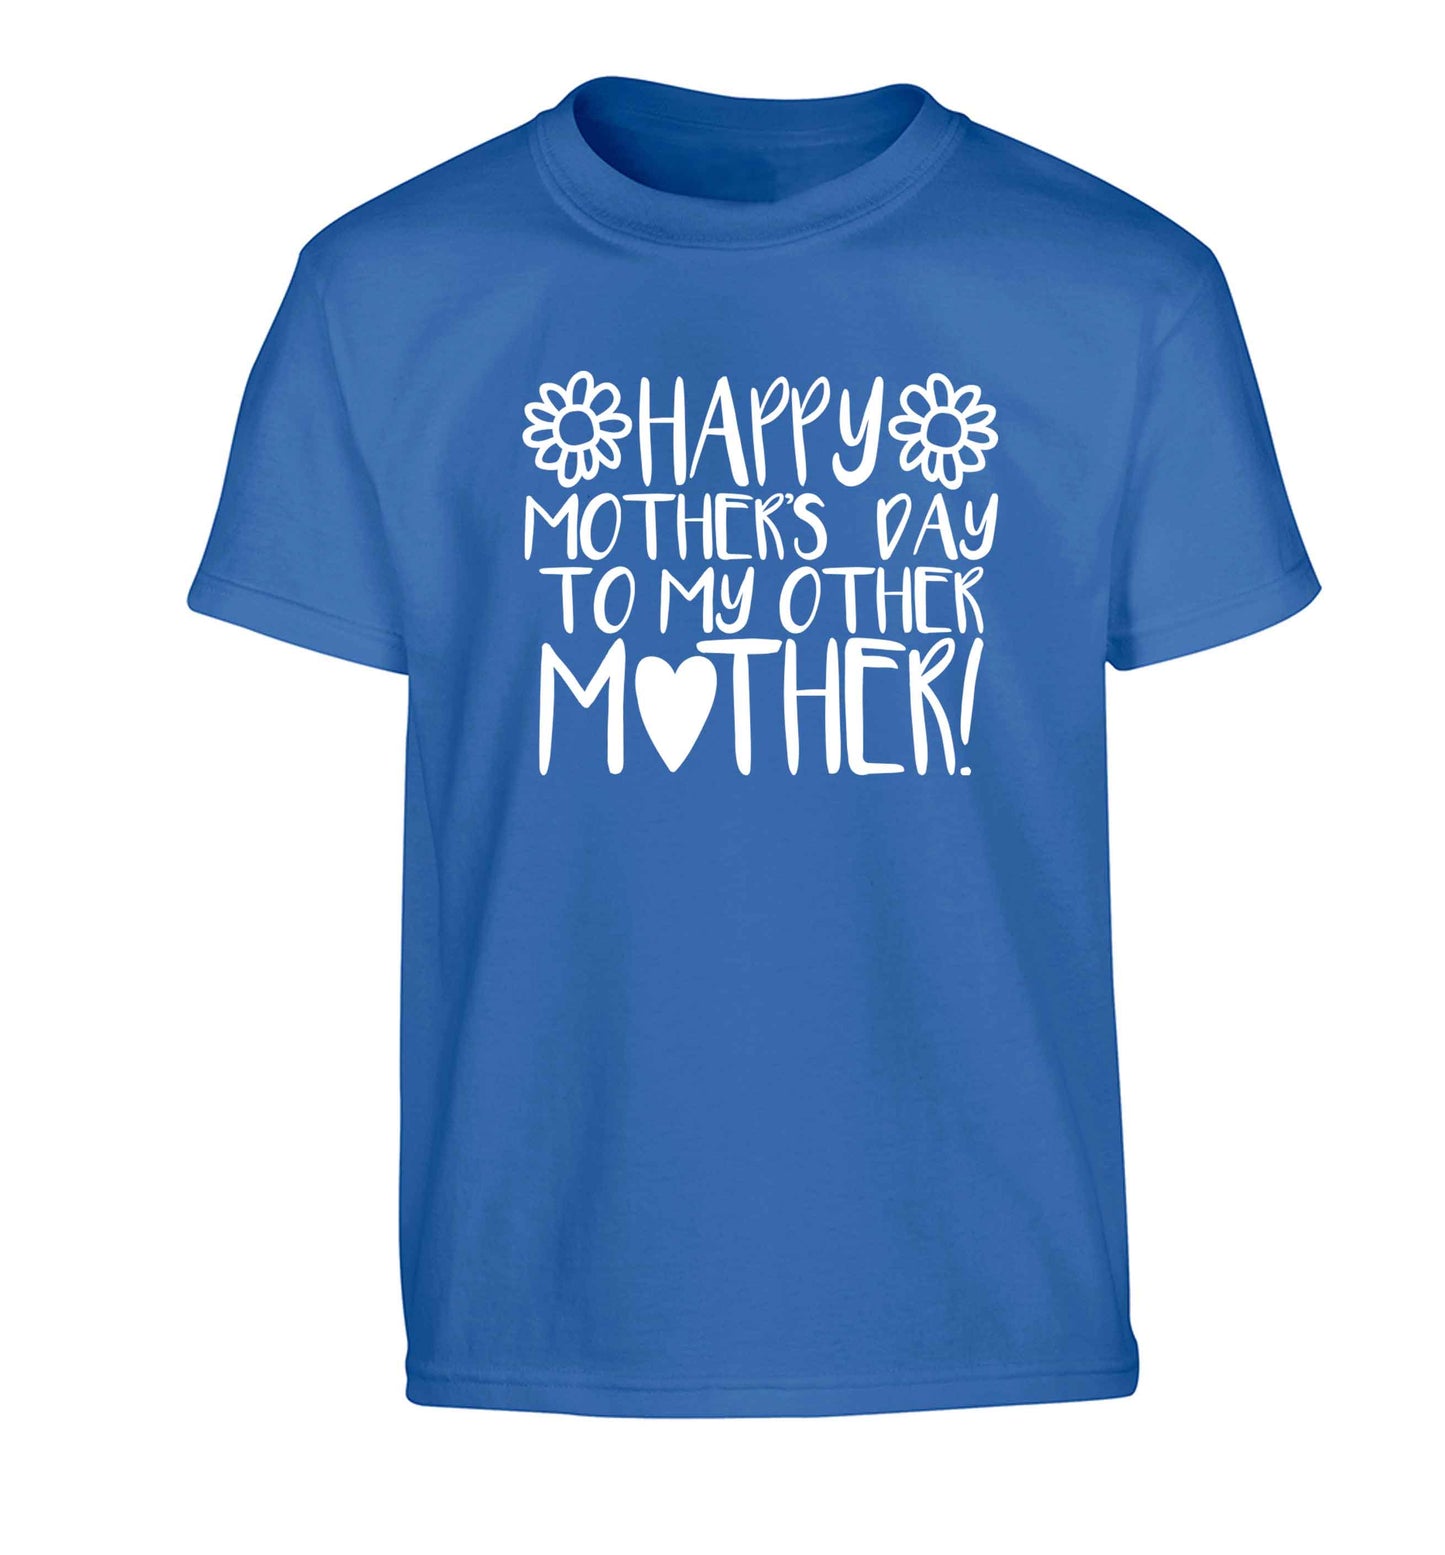 Happy mother's day to my other mother Children's blue Tshirt 12-13 Years